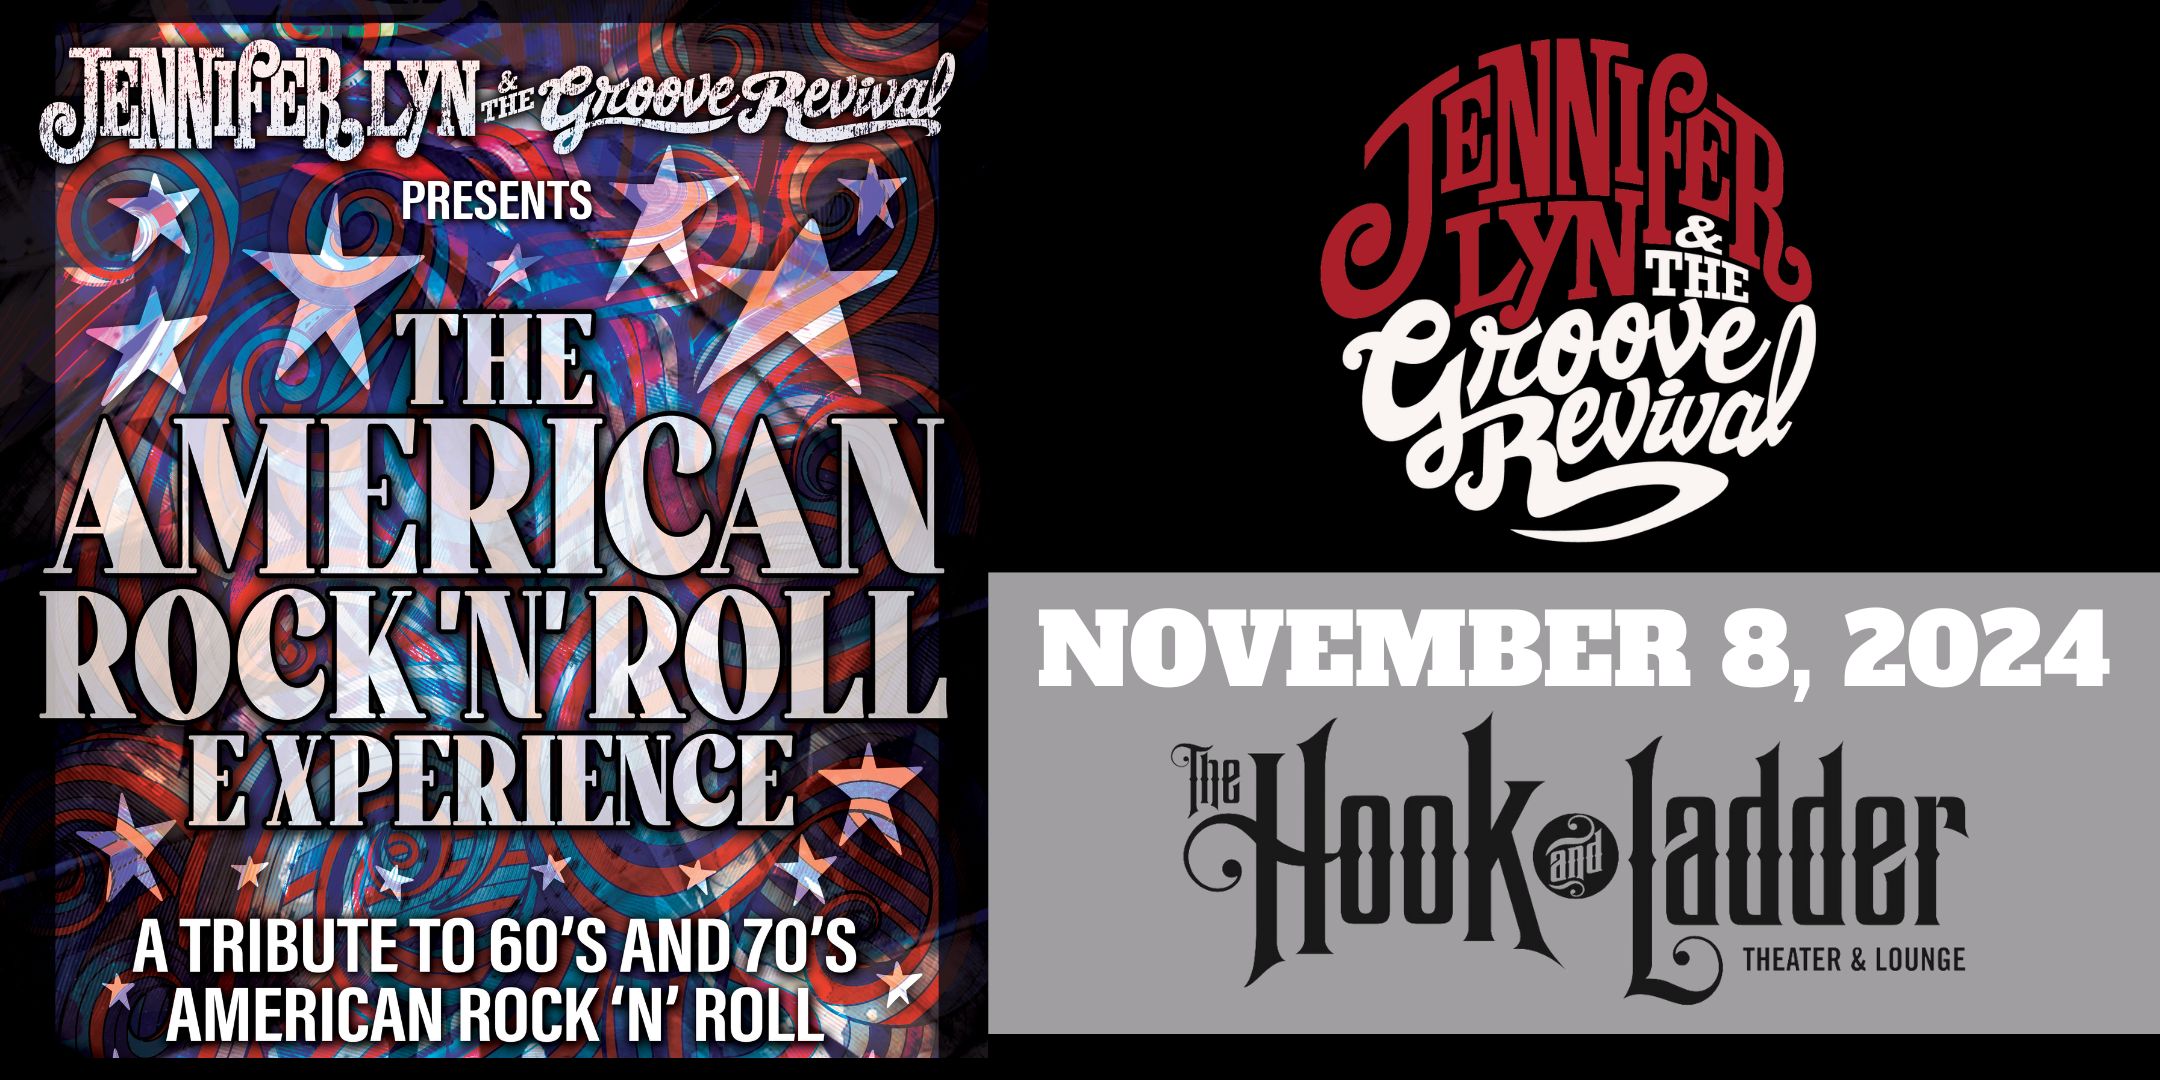 Jennifer Lyn and The Groove Revival presents “The American Rock and Roll Experience” A Tribute to Jimi Hendrix, Janis Joplin, The Eagles and beyond! Friday, November 8 Doors 7pm :: Music 8pm Reserved Seats: $34 (60) GA: $18 ADV / $24 DOS 2 Sets with 15 minute Break 8pm - 9pm 9:15 - 10:15pm + Encore